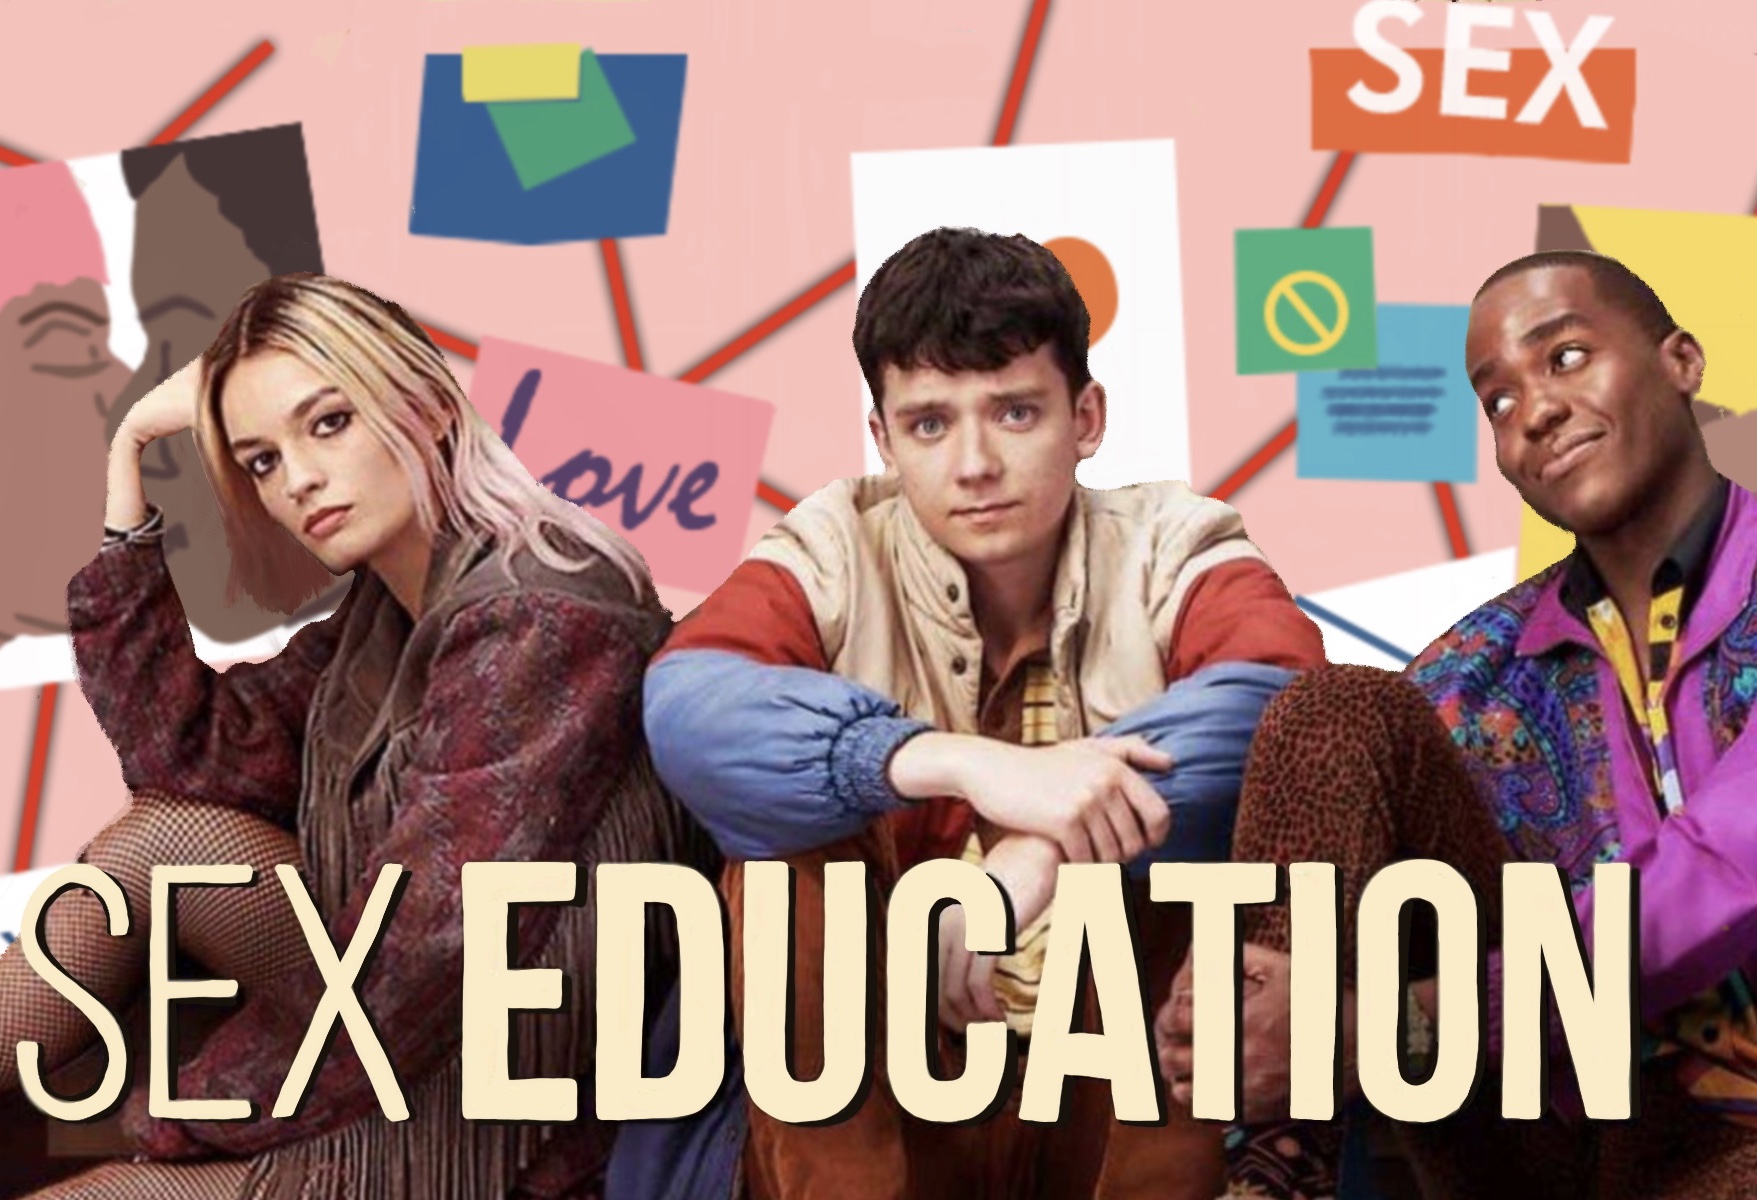 Sex Education Season 3: Netflix Releases the Trailer for the Upcoming Season